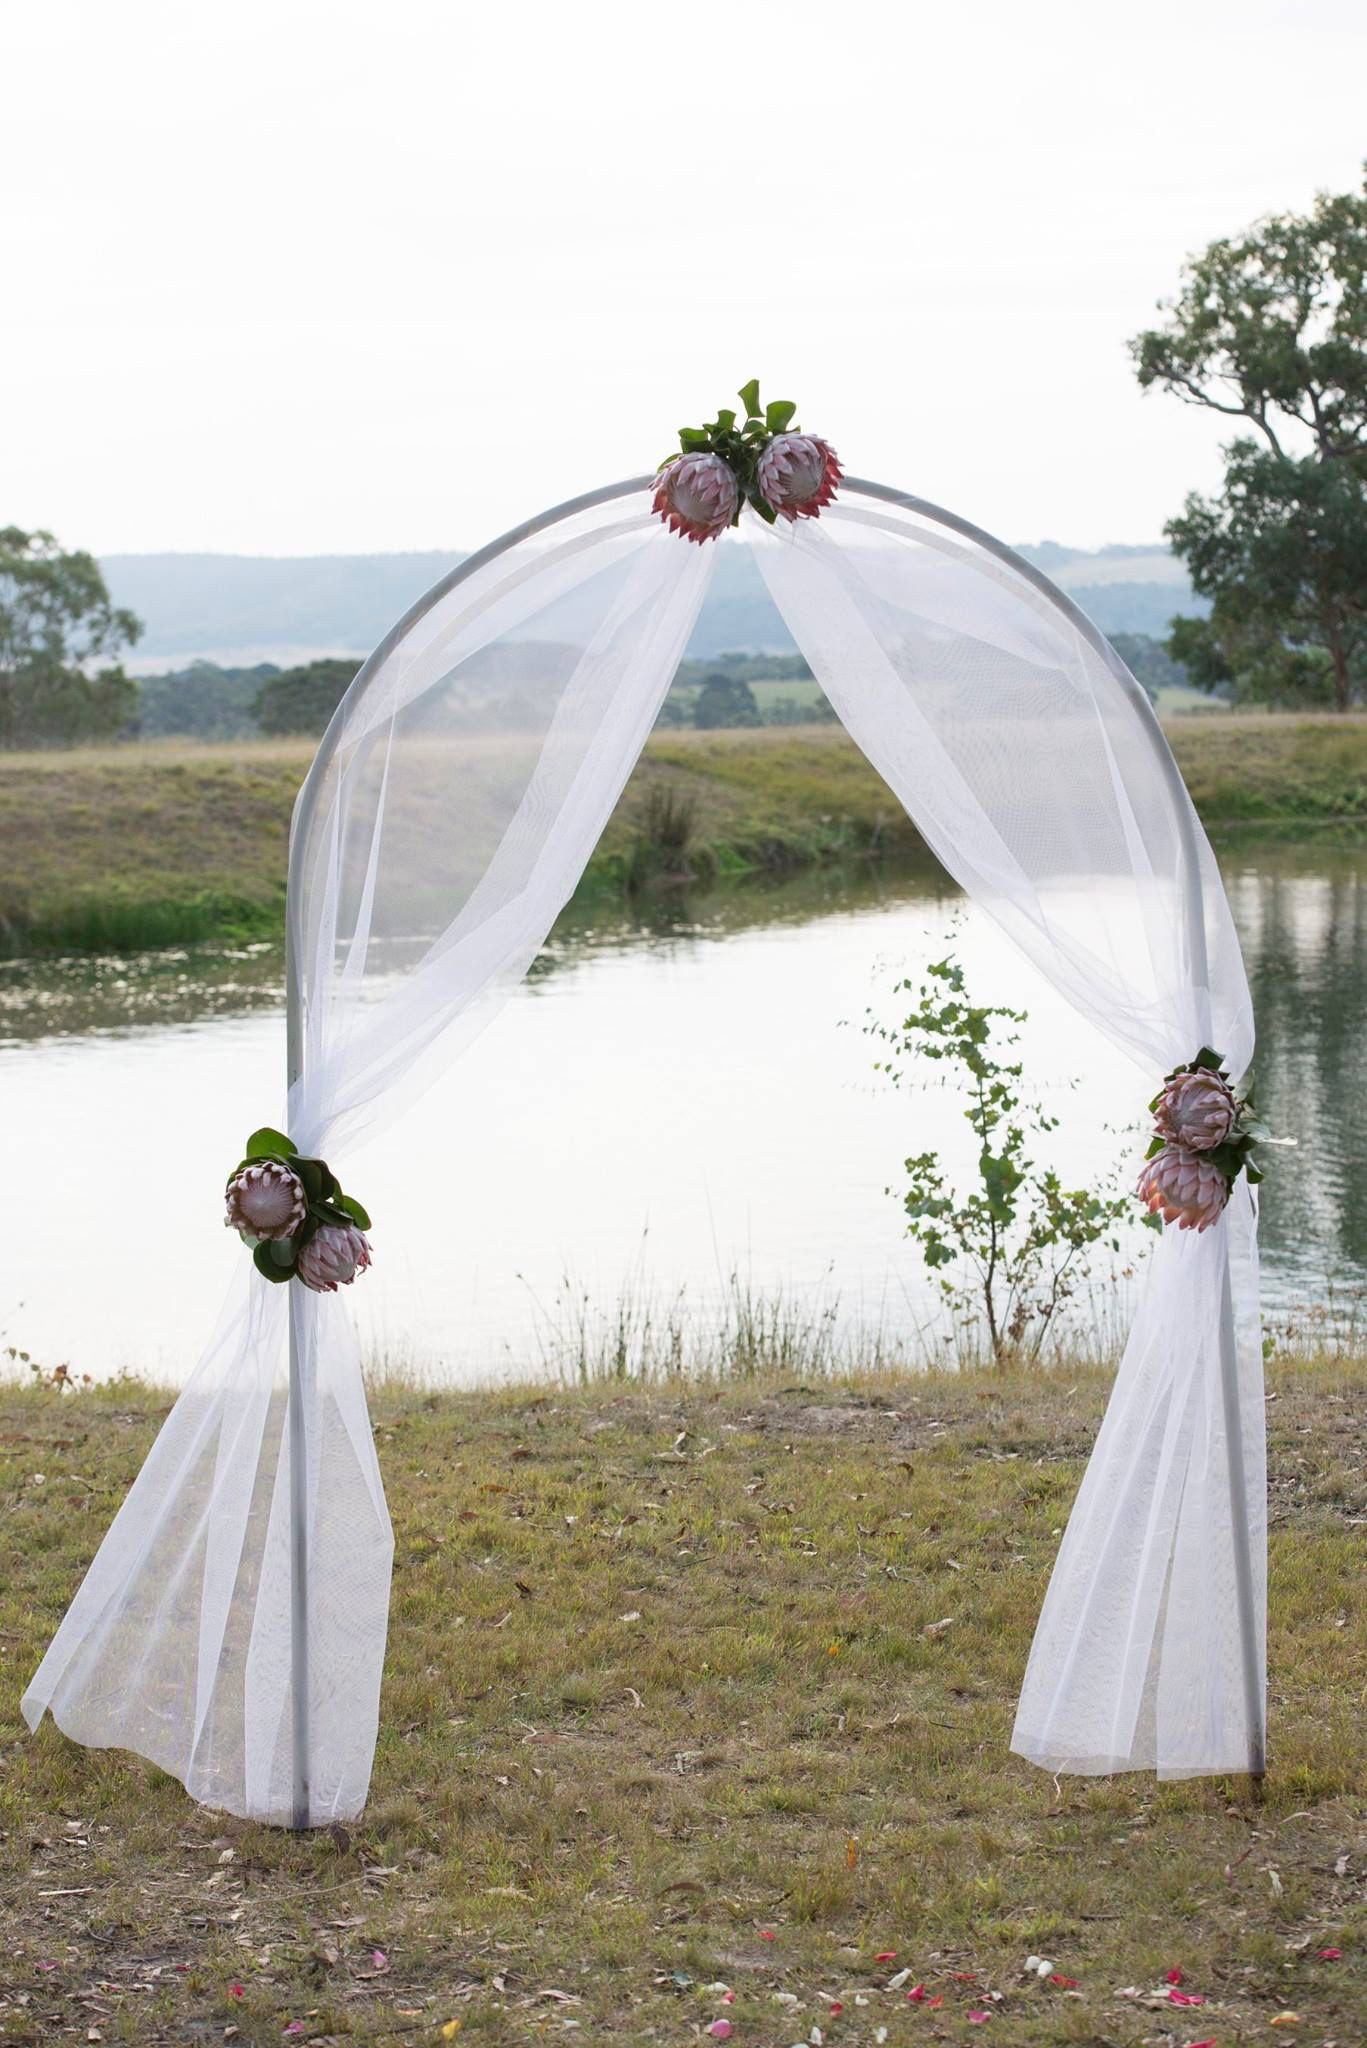 Decorating A Wedding Arch
 Gorgeous ceremony Arch decorated with tulle and King